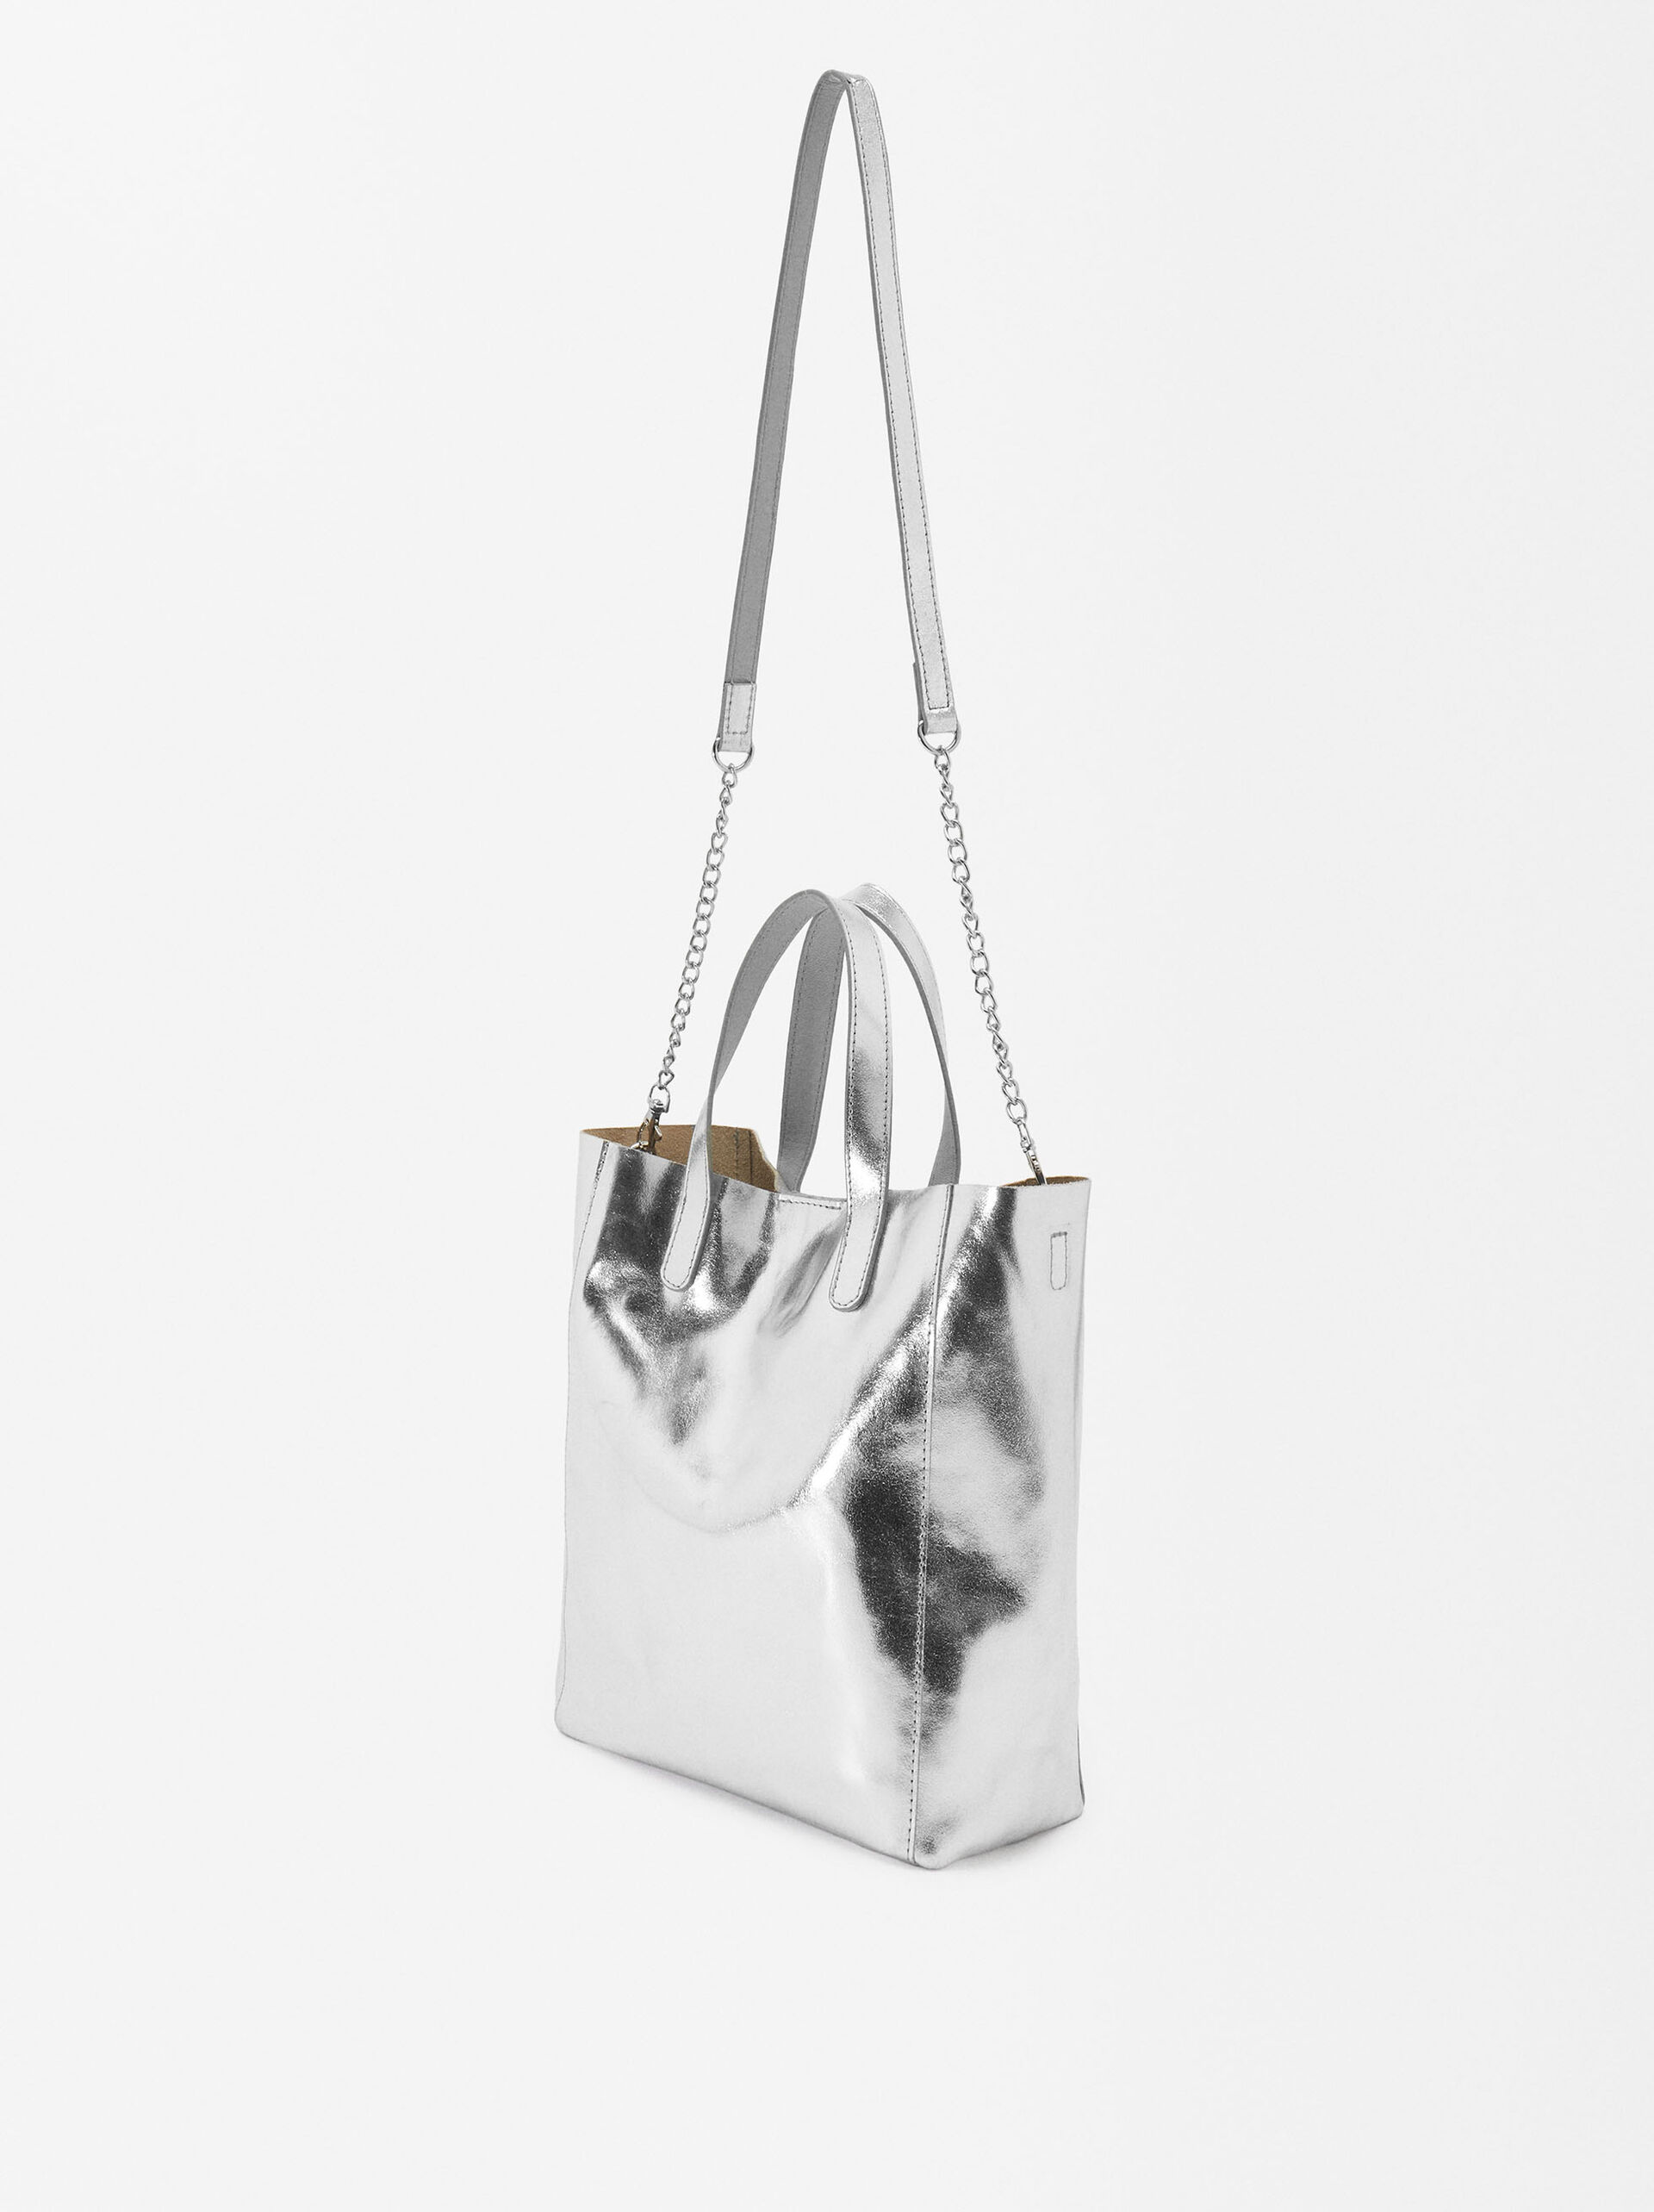 Borsa Shopper In Pelle Metallizzata - Limited Edition image number 4.0